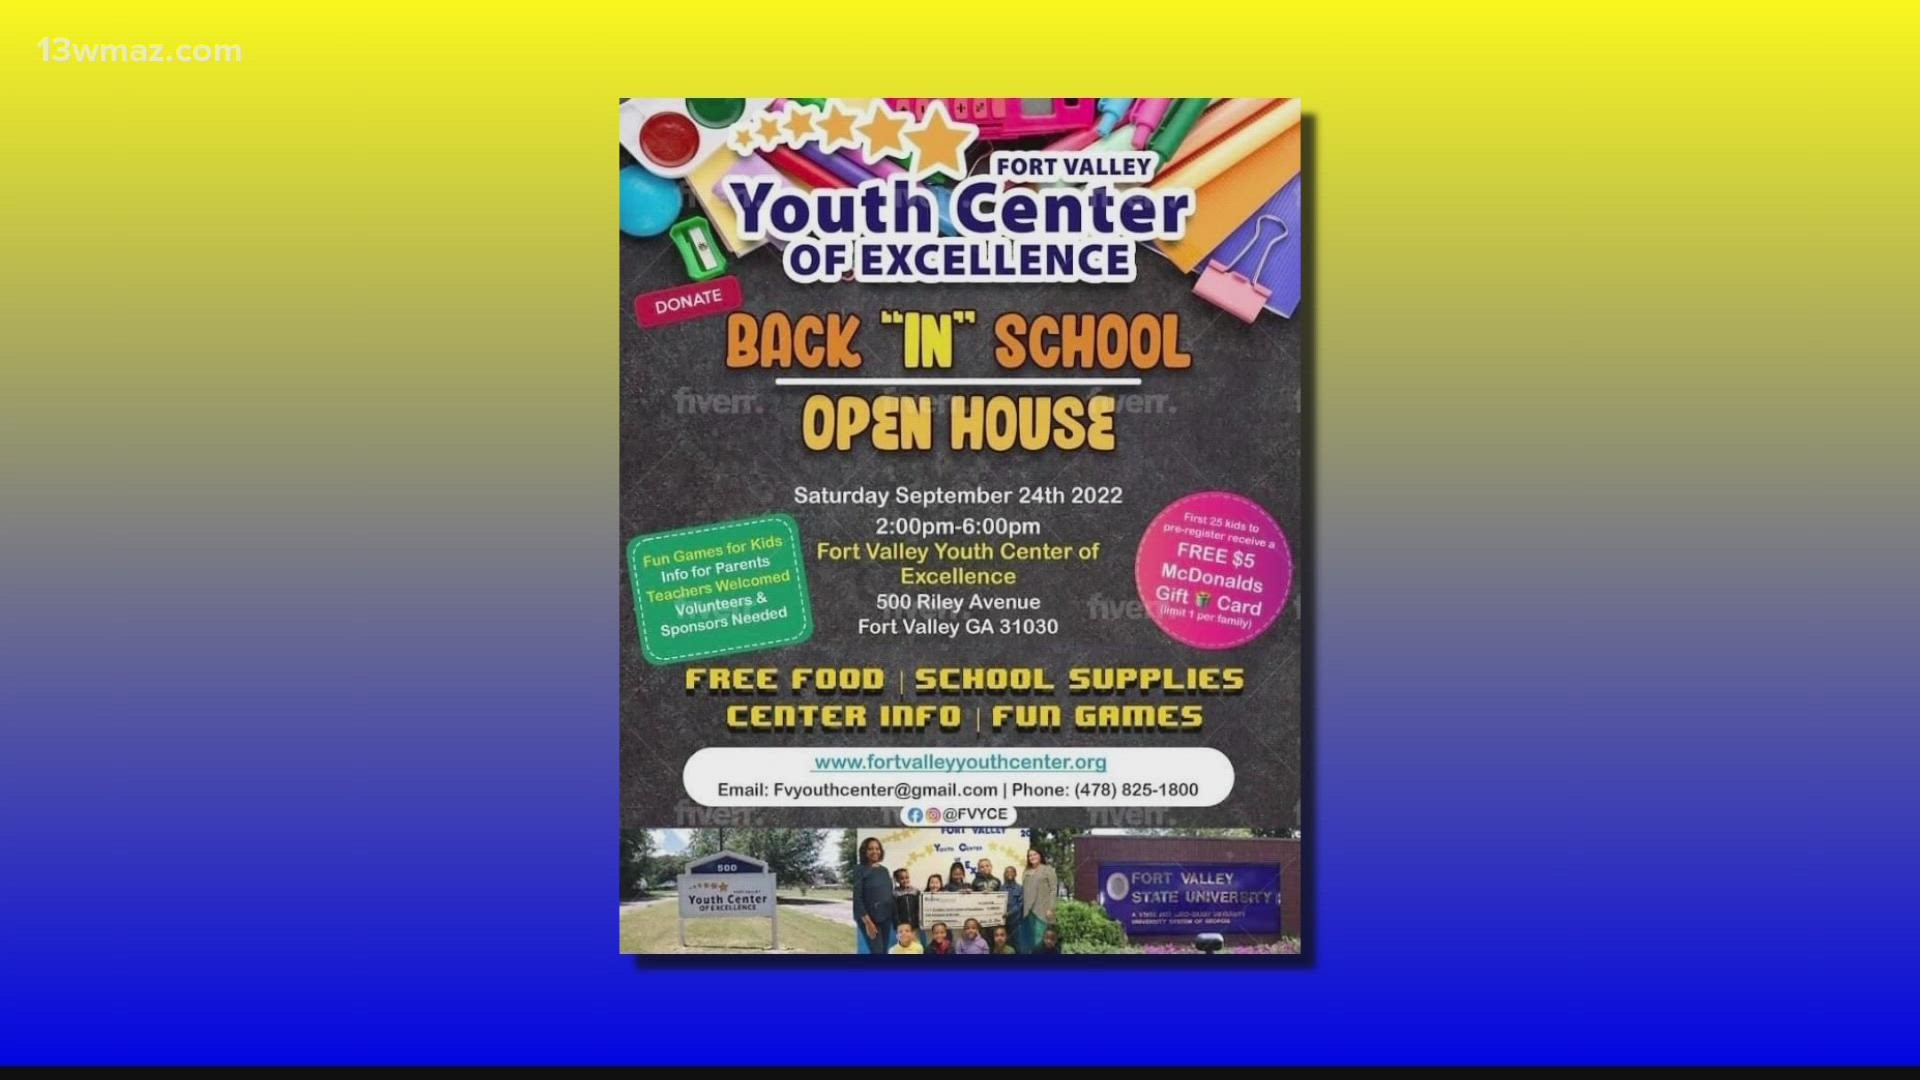 The Fort Valley Youth Center of Excellence will have their back "in" school open house this Saturday on Riley Avenue.